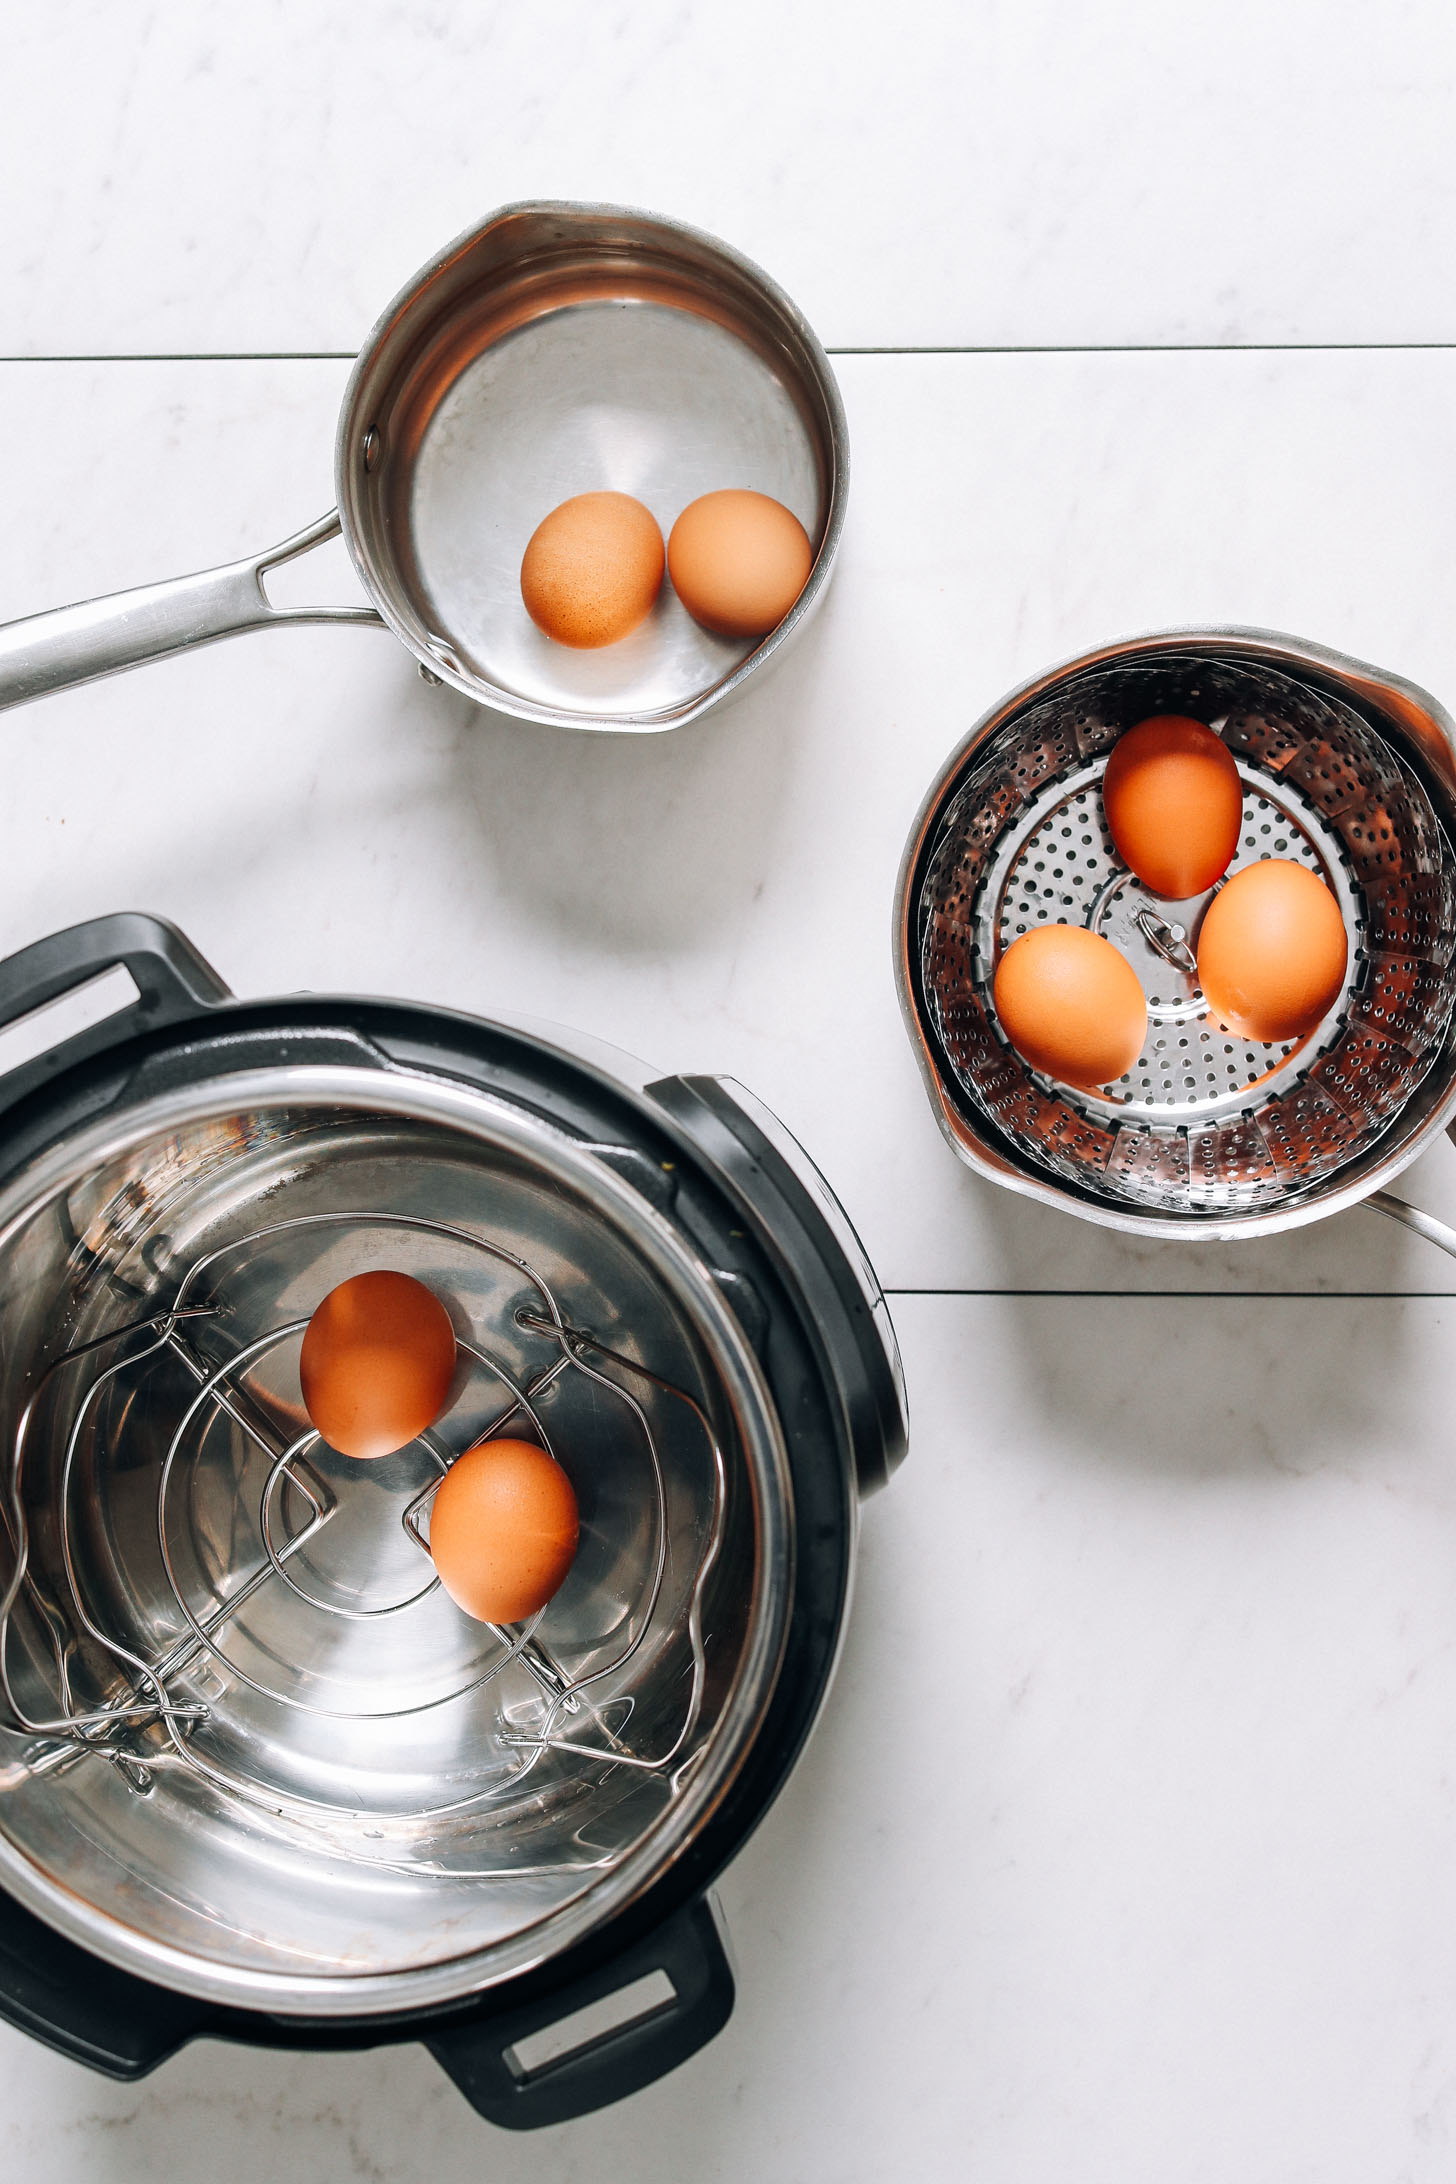 Hard boiled eggs in a steamer basket, saucepan, and instant pot for our post on how to make perfect hard boiled eggs